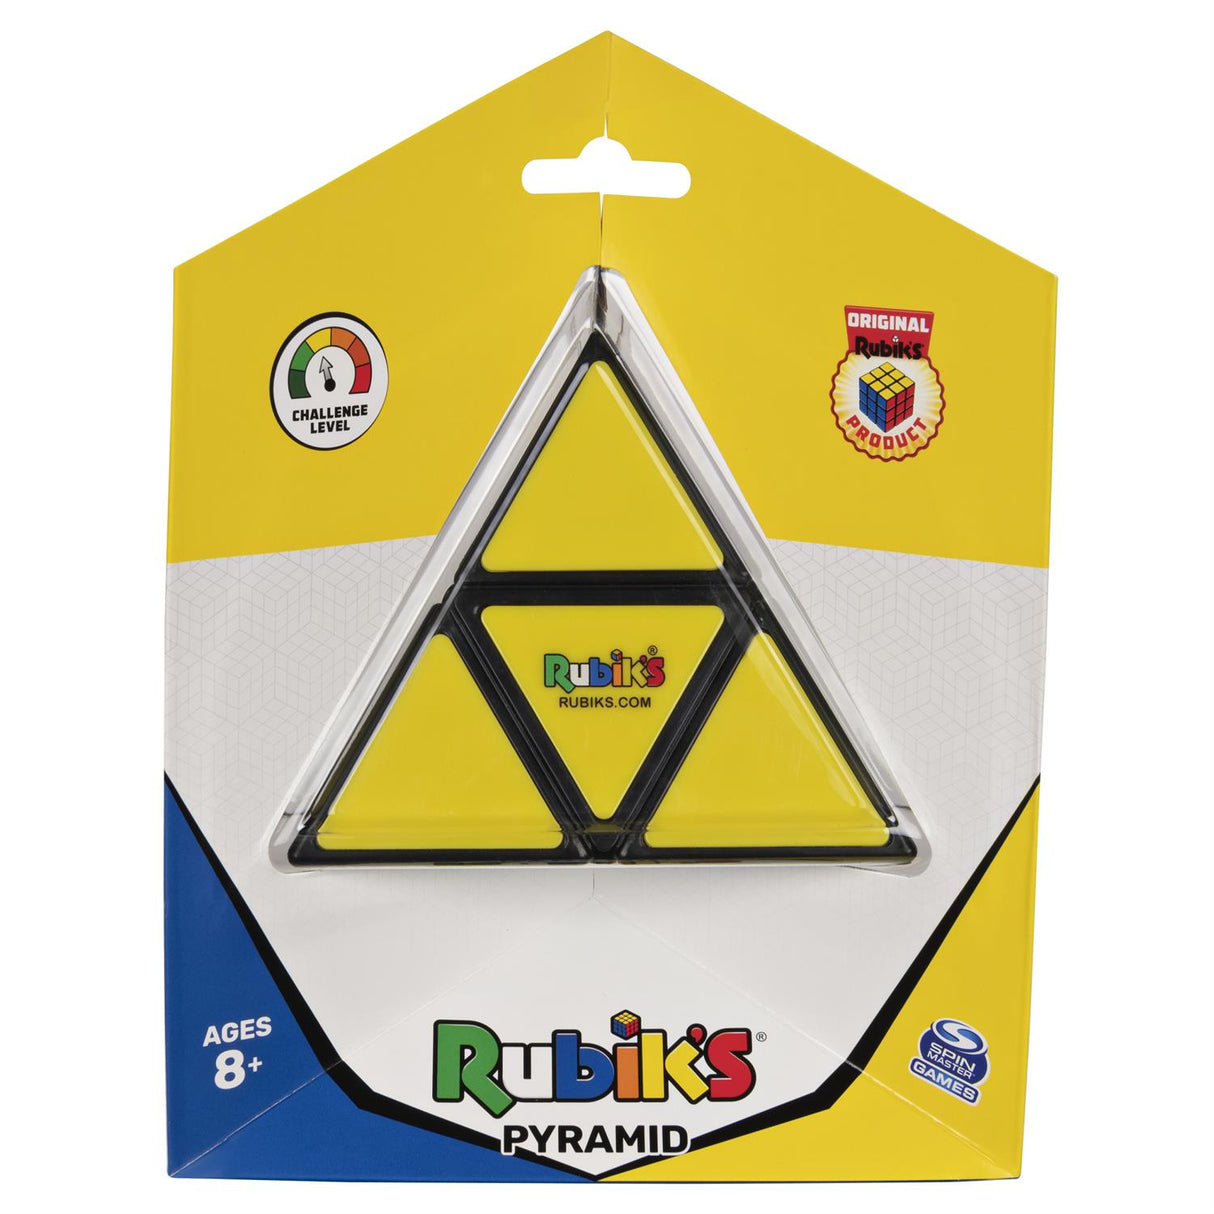 Colorful Rubik's Pyramid: A classic puzzle toy featuring a triangular shape and multiple panels to twist and solve.